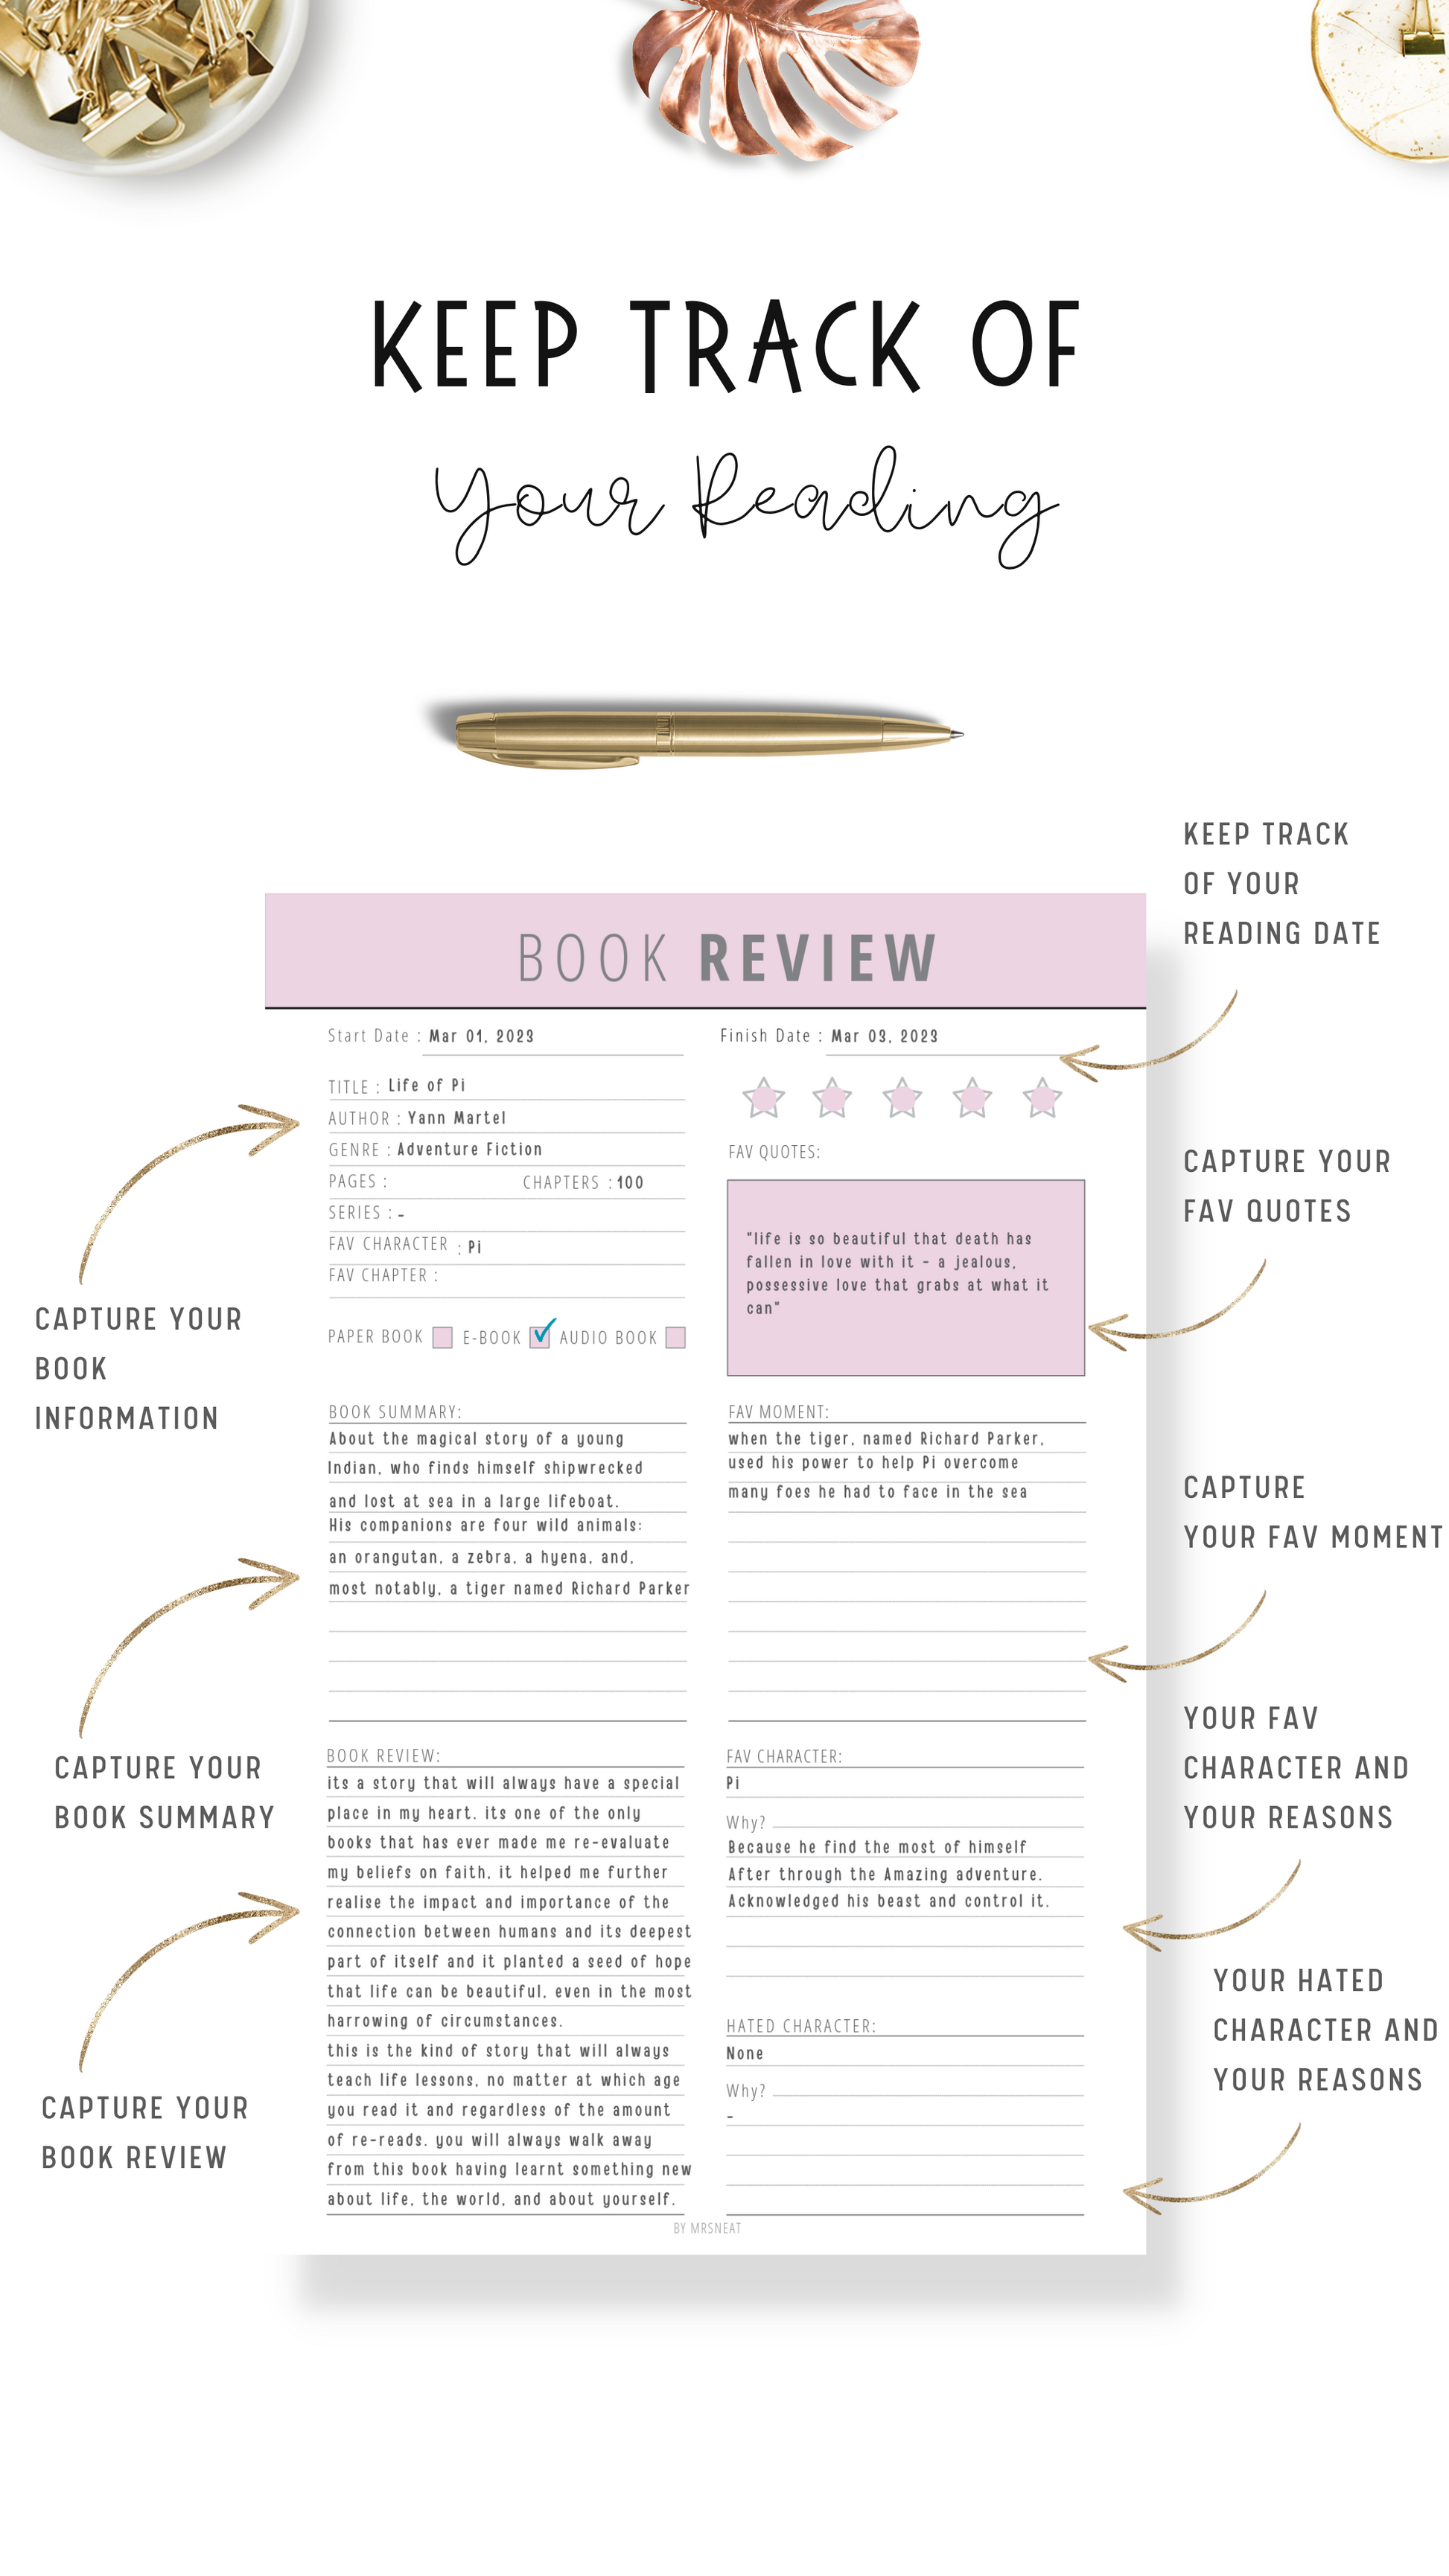 Book Review planner to keep on track the reading journal with book information detail